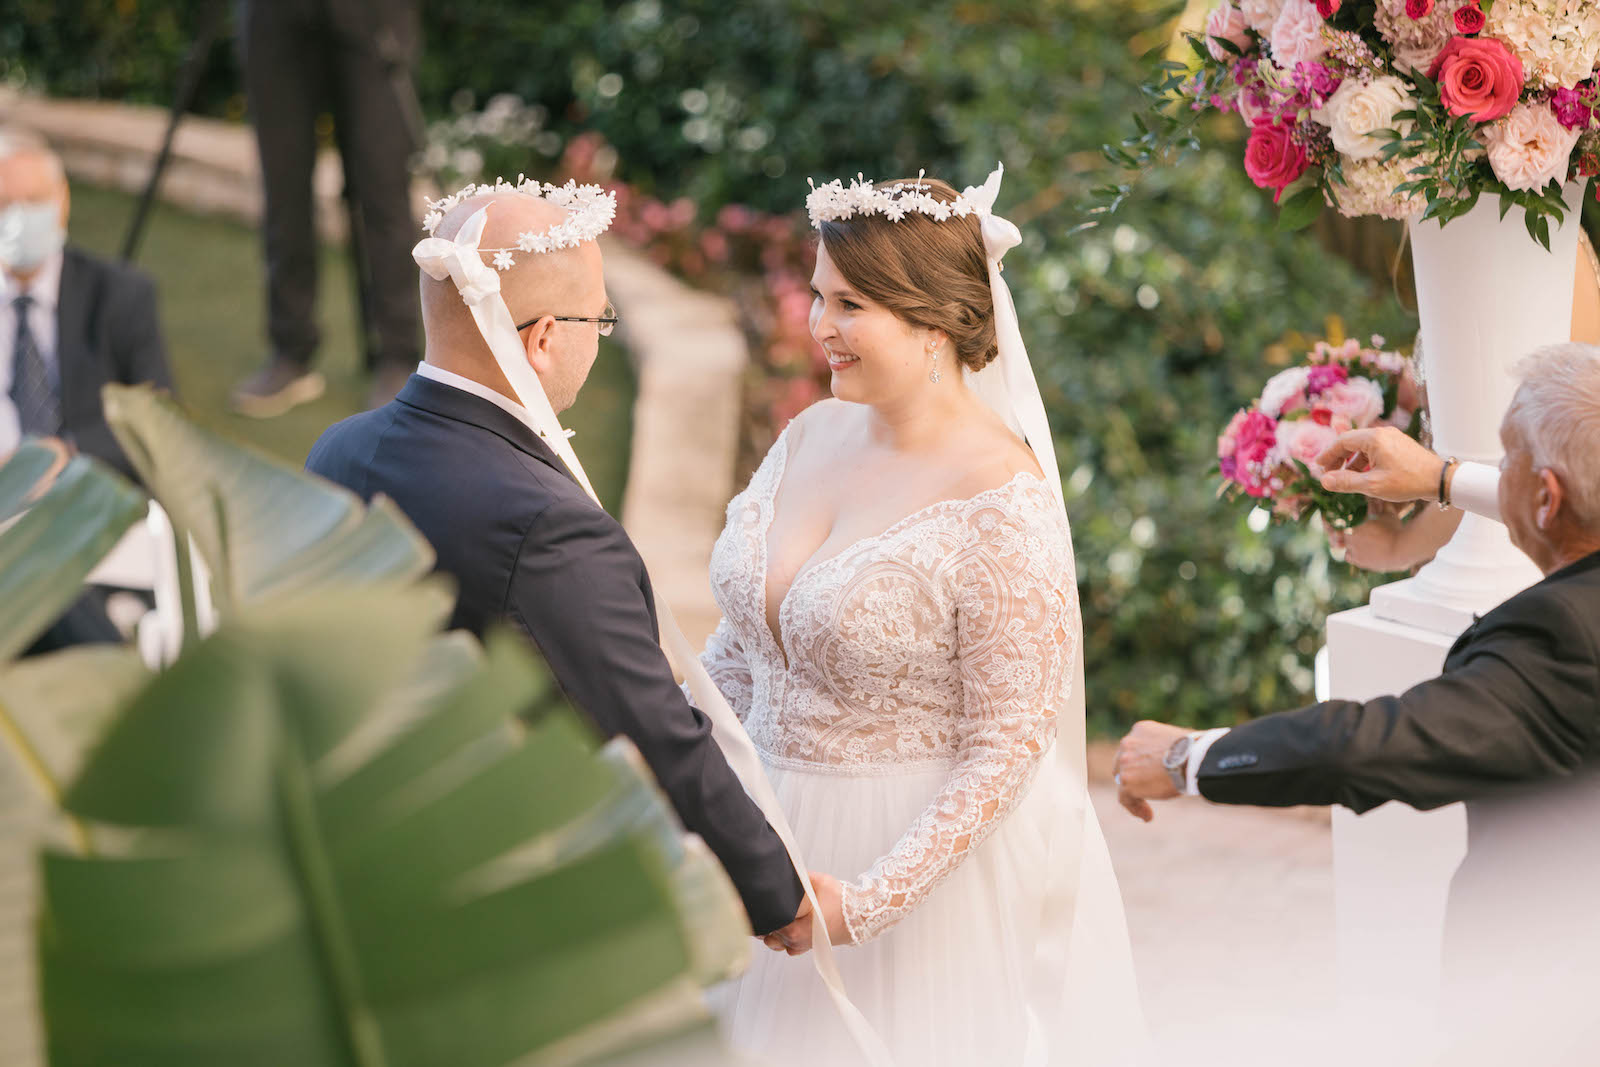 Florida Bride and Groom Wearing White Flower Crowns Exchanging Wedding Ceremony Vows on Steps of Historic St. Pete Wedding Venue The Don Cesar | Tampa Bay Wedding Planner Parties A'la Carte | Wedding Florist Bruce Wayne Florals